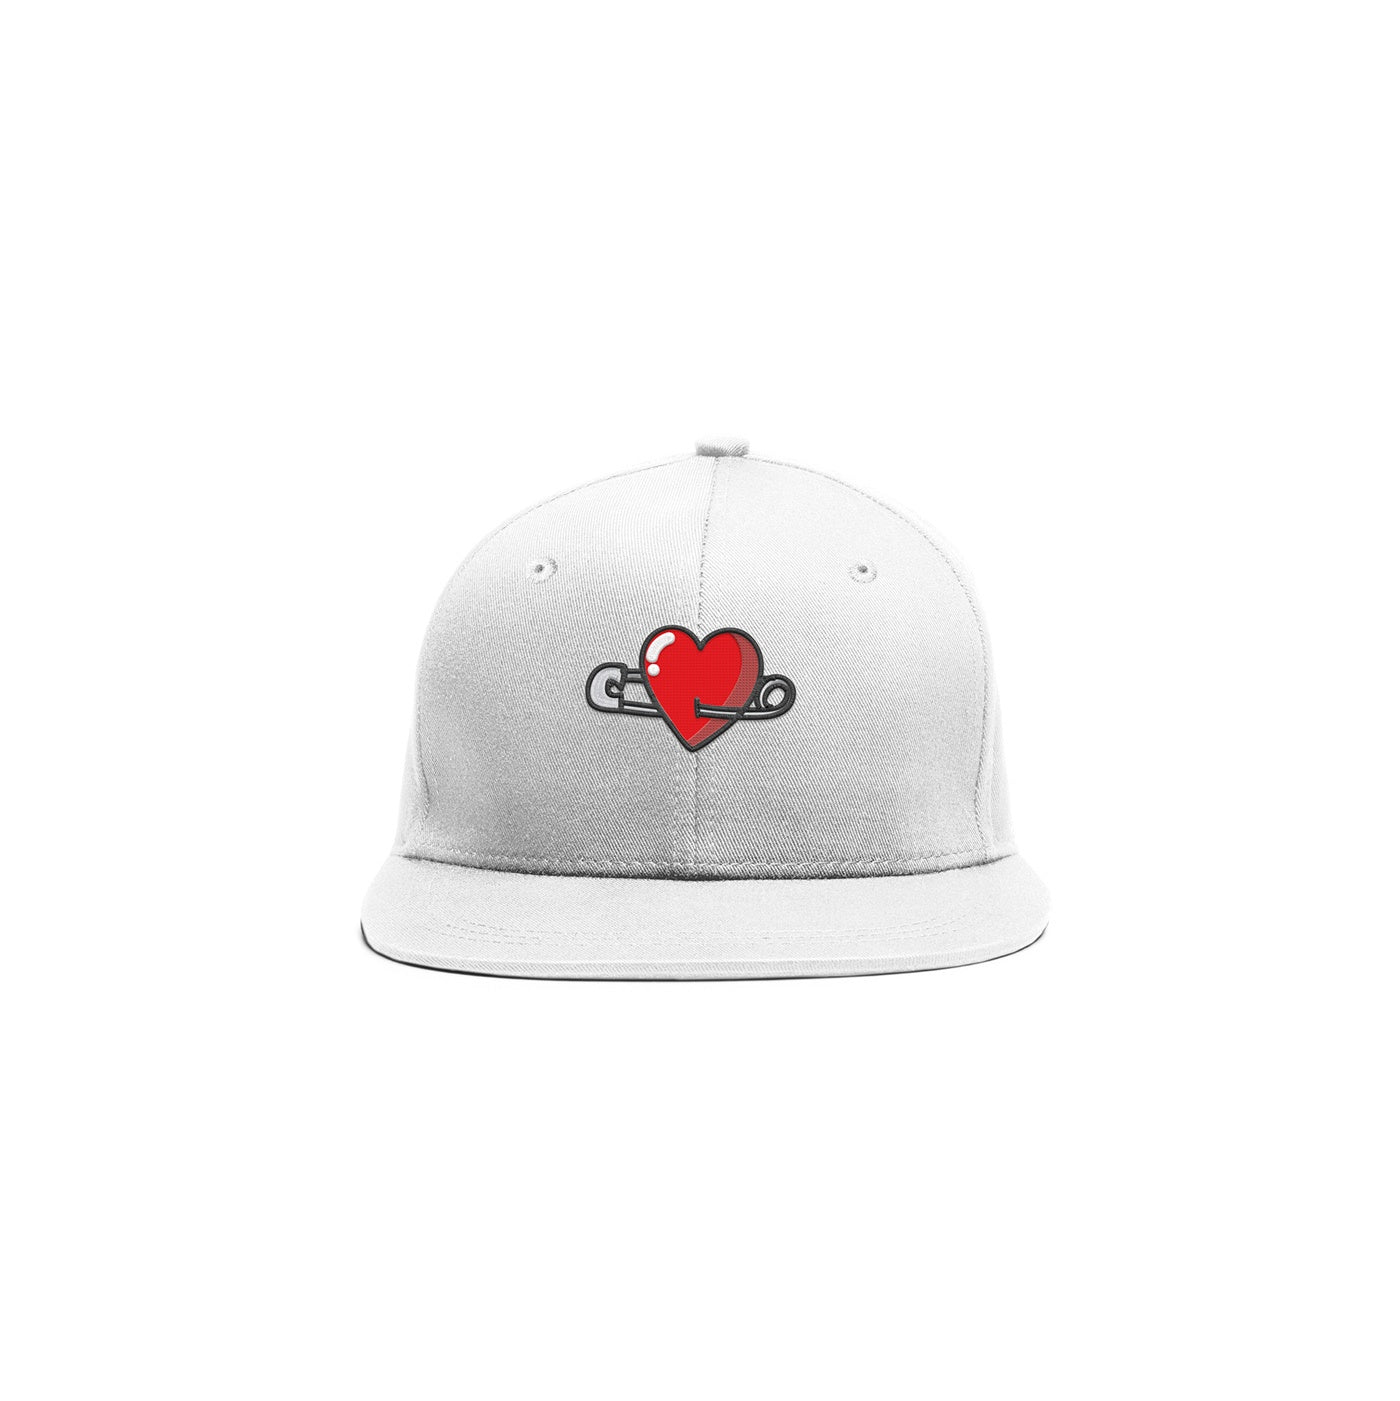 Embroidered My Heart Cap